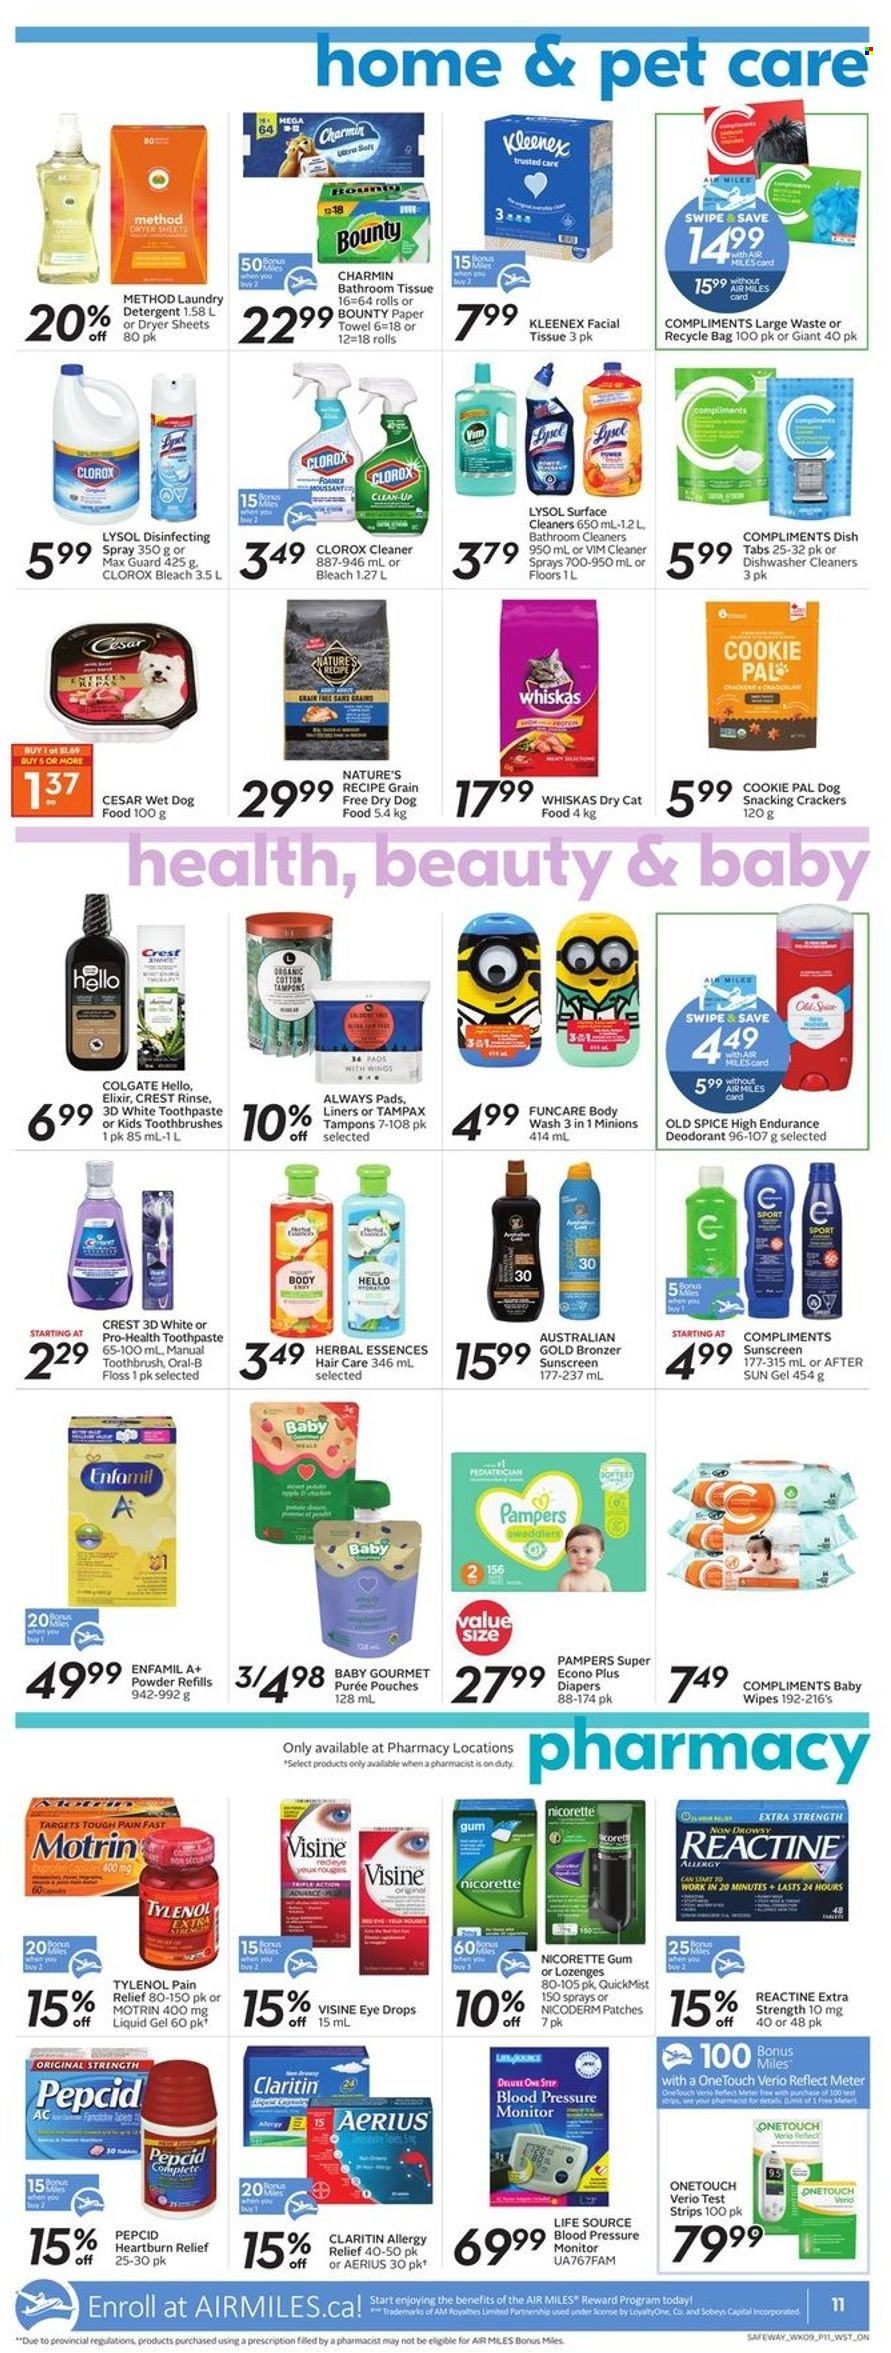 thumbnail - Safeway Flyer - June 30, 2022 - July 06, 2022 - Sales products - Australian Gold, Bounty, crackers, spice, Enfamil, baby food pouch, wipes, baby wipes, nappies, bath tissue, Kleenex, paper towels, Charmin, cleaner, bleach, Lysol, Clorox, laundry detergent, dryer sheets, body wash, Minions, toothbrush, toothpaste, Crest, Always pads, tampons, Herbal Essences, anti-perspirant, bronzing powder, animal food, cat food, dog food, wet dog food, dry dog food, dry cat food, pain relief, NicoDerm, Nicorette, Tylenol, Pepcid, eye drops, Nicorette Gum, allergy relief, Motrin, pressure monitor, detergent, Colgate, Tampax, Pampers, Old Spice, Oral-B, Whiskas, deodorant. Page 14.